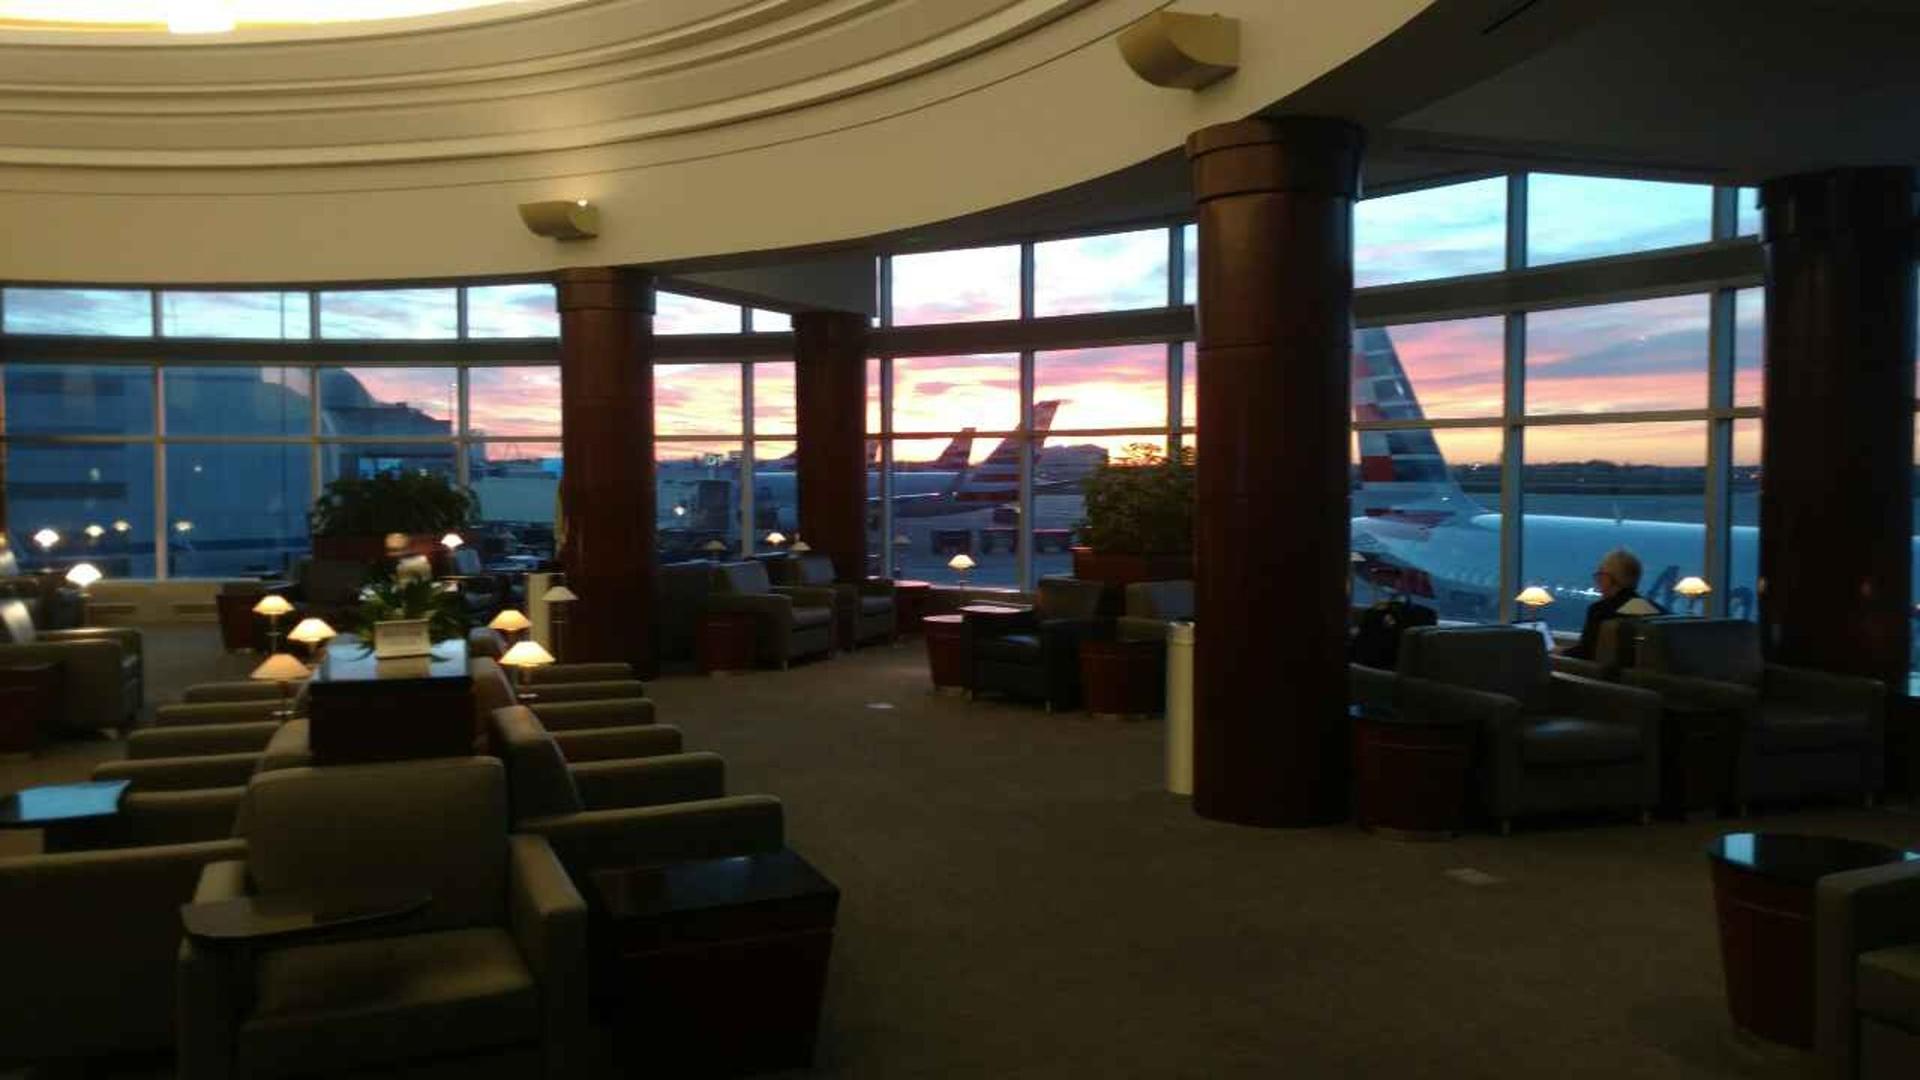 American Airlines Admirals Club image 10 of 37